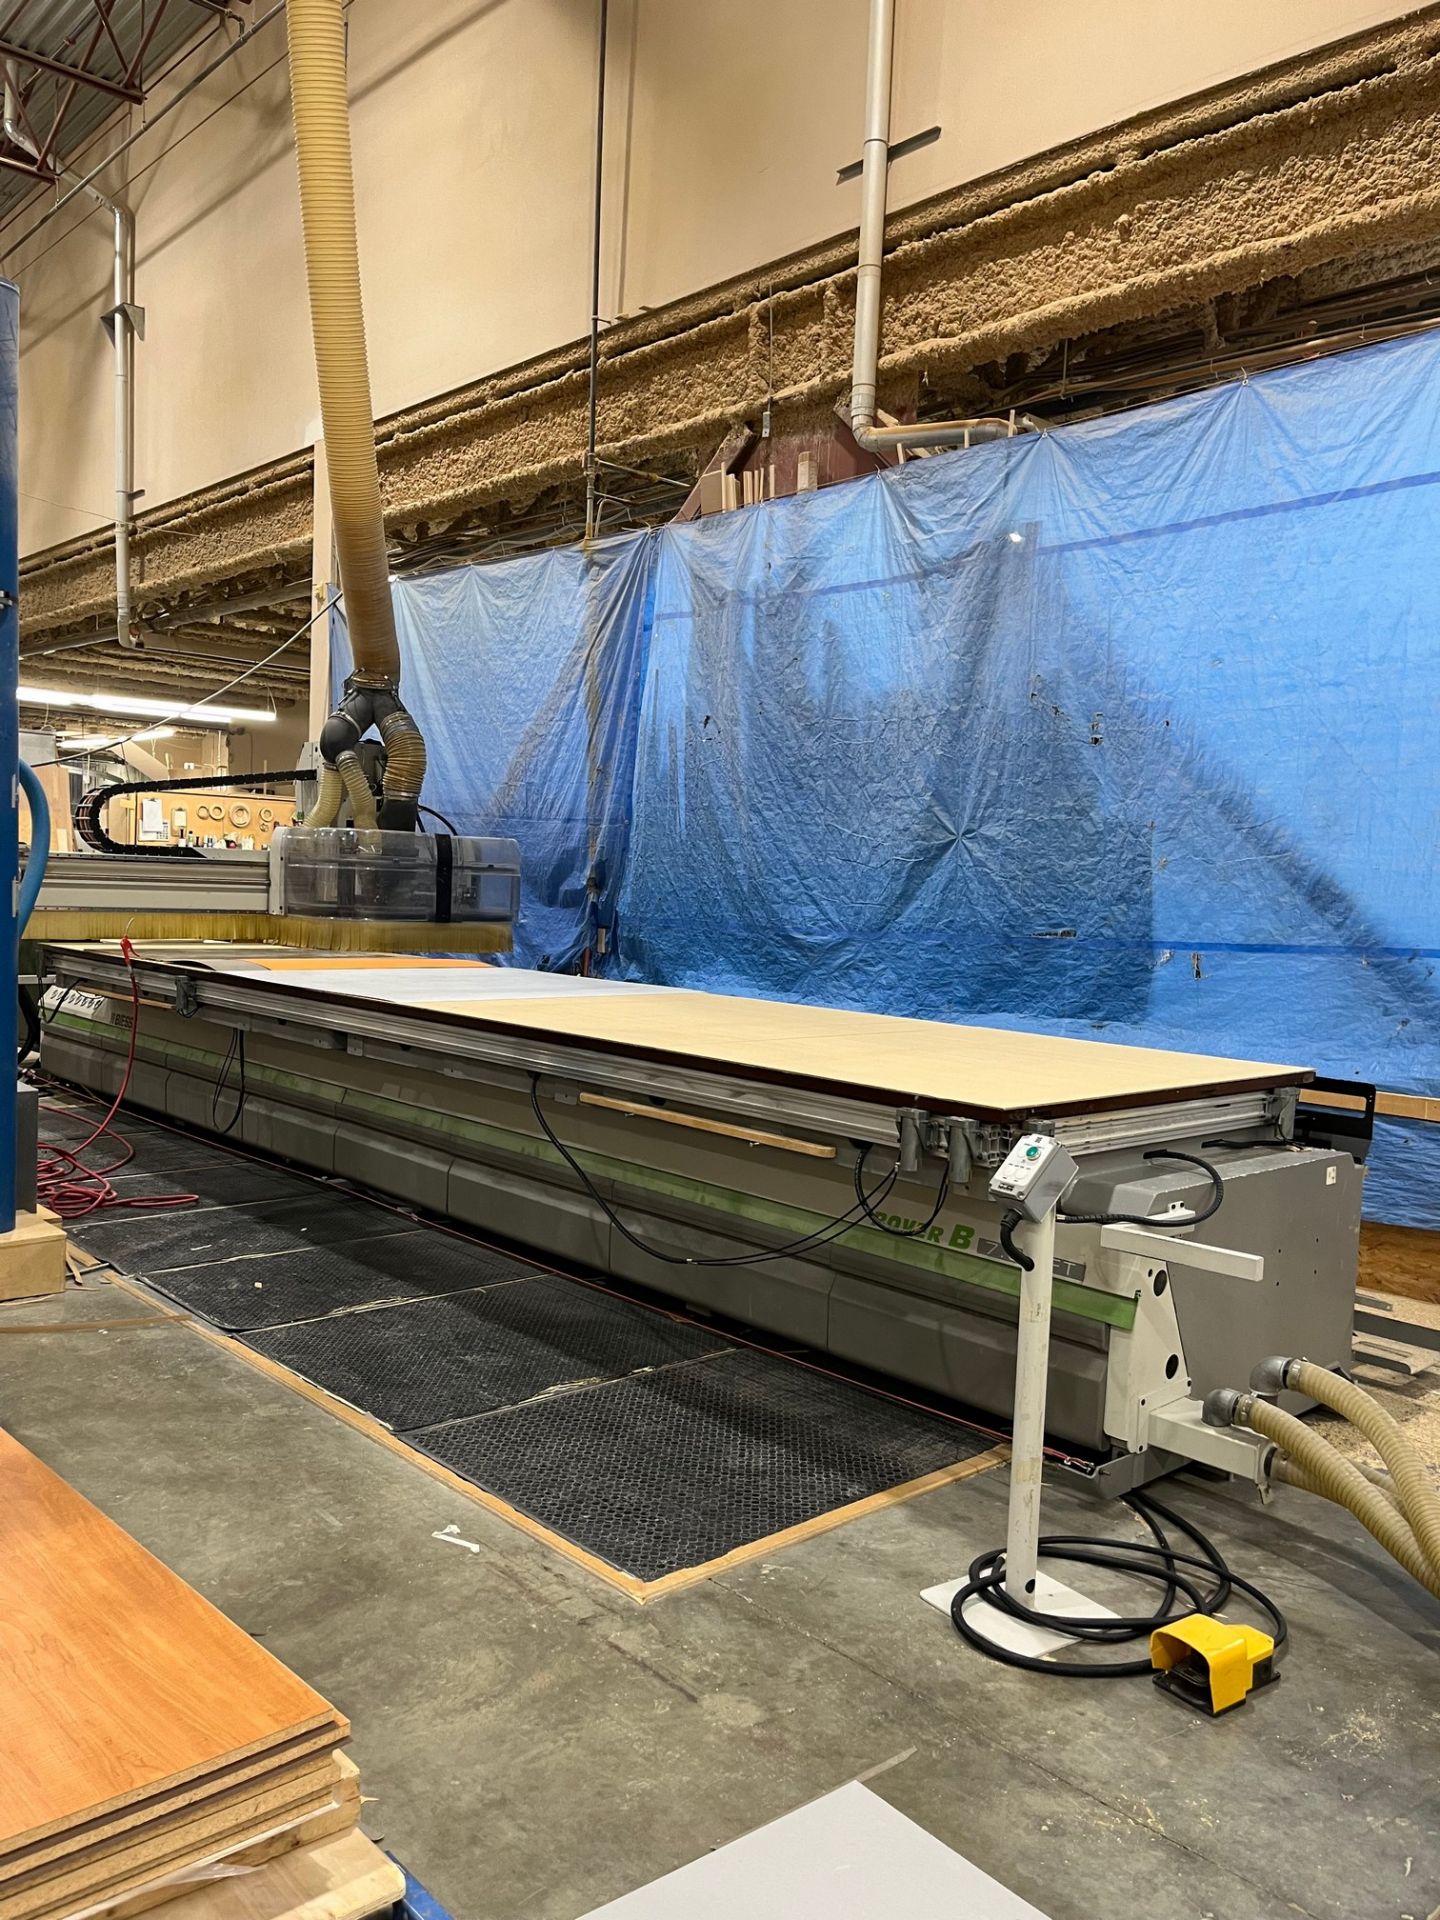 2006 BIESSE ROVER B 7.65 FT CNC ROUTER, 5' X 20' NESTED TABLE, S/N 65328, 600V,